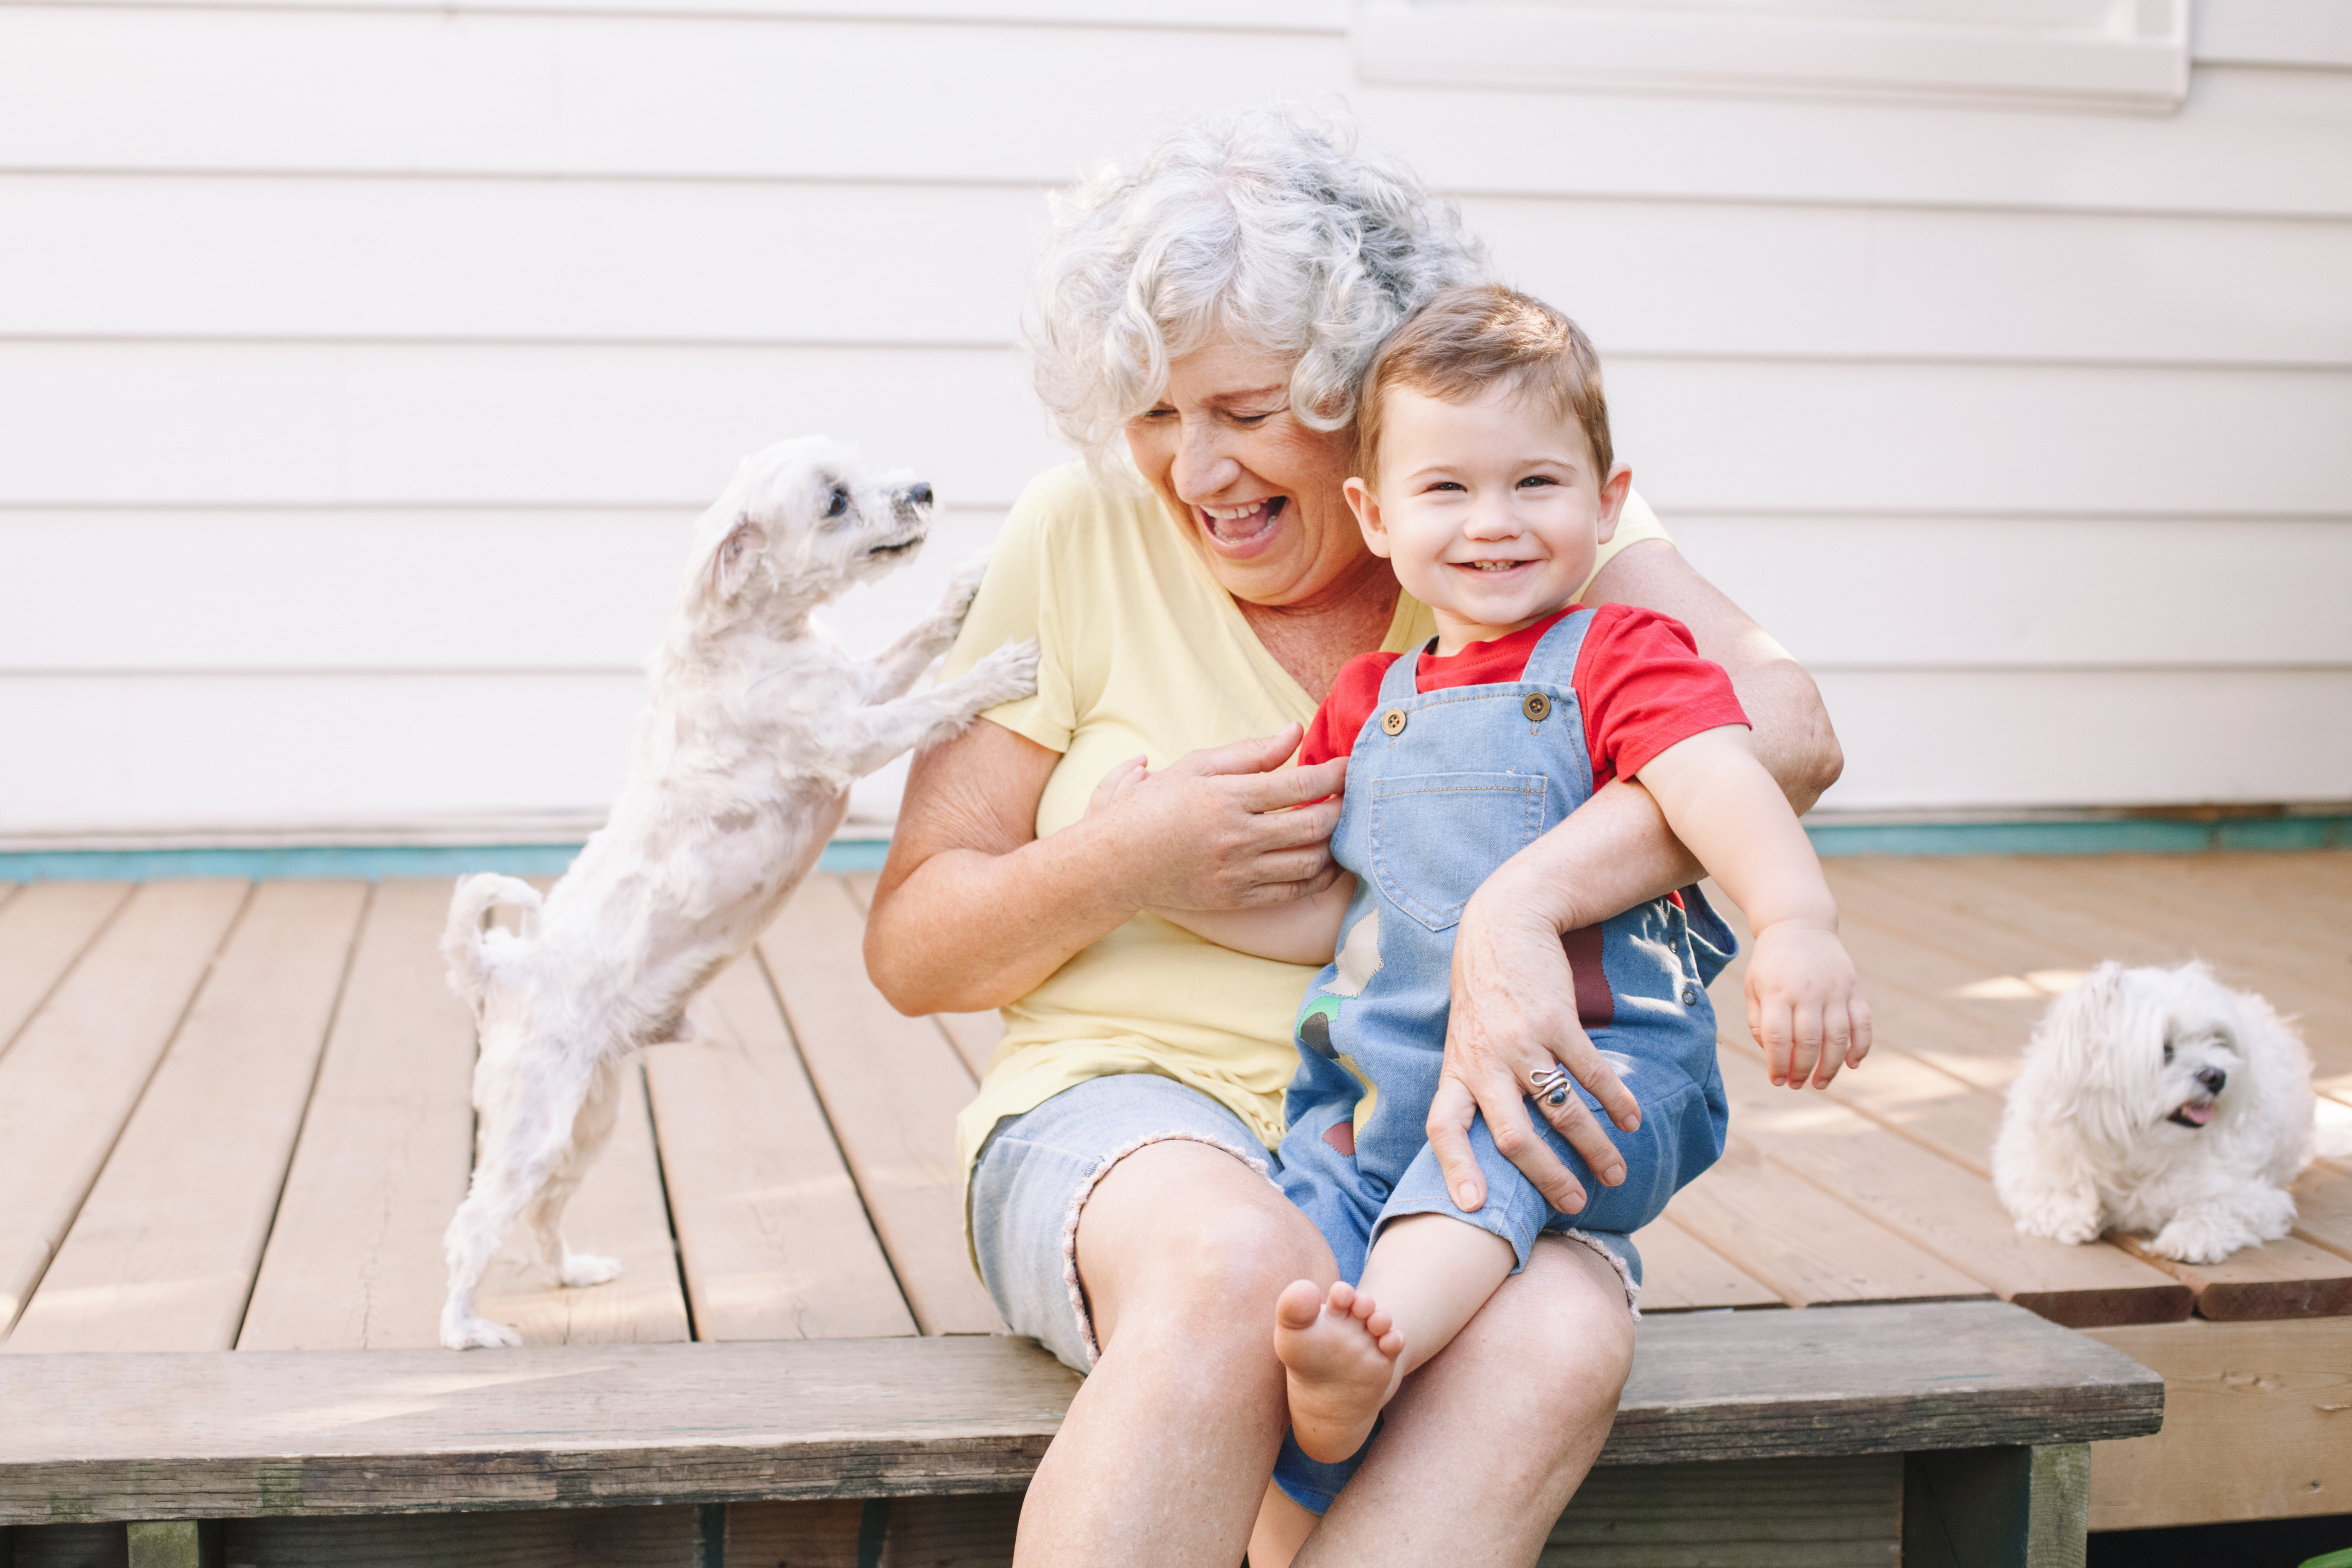 A grandmother with a dog and her grand child | Source: Shutterstock